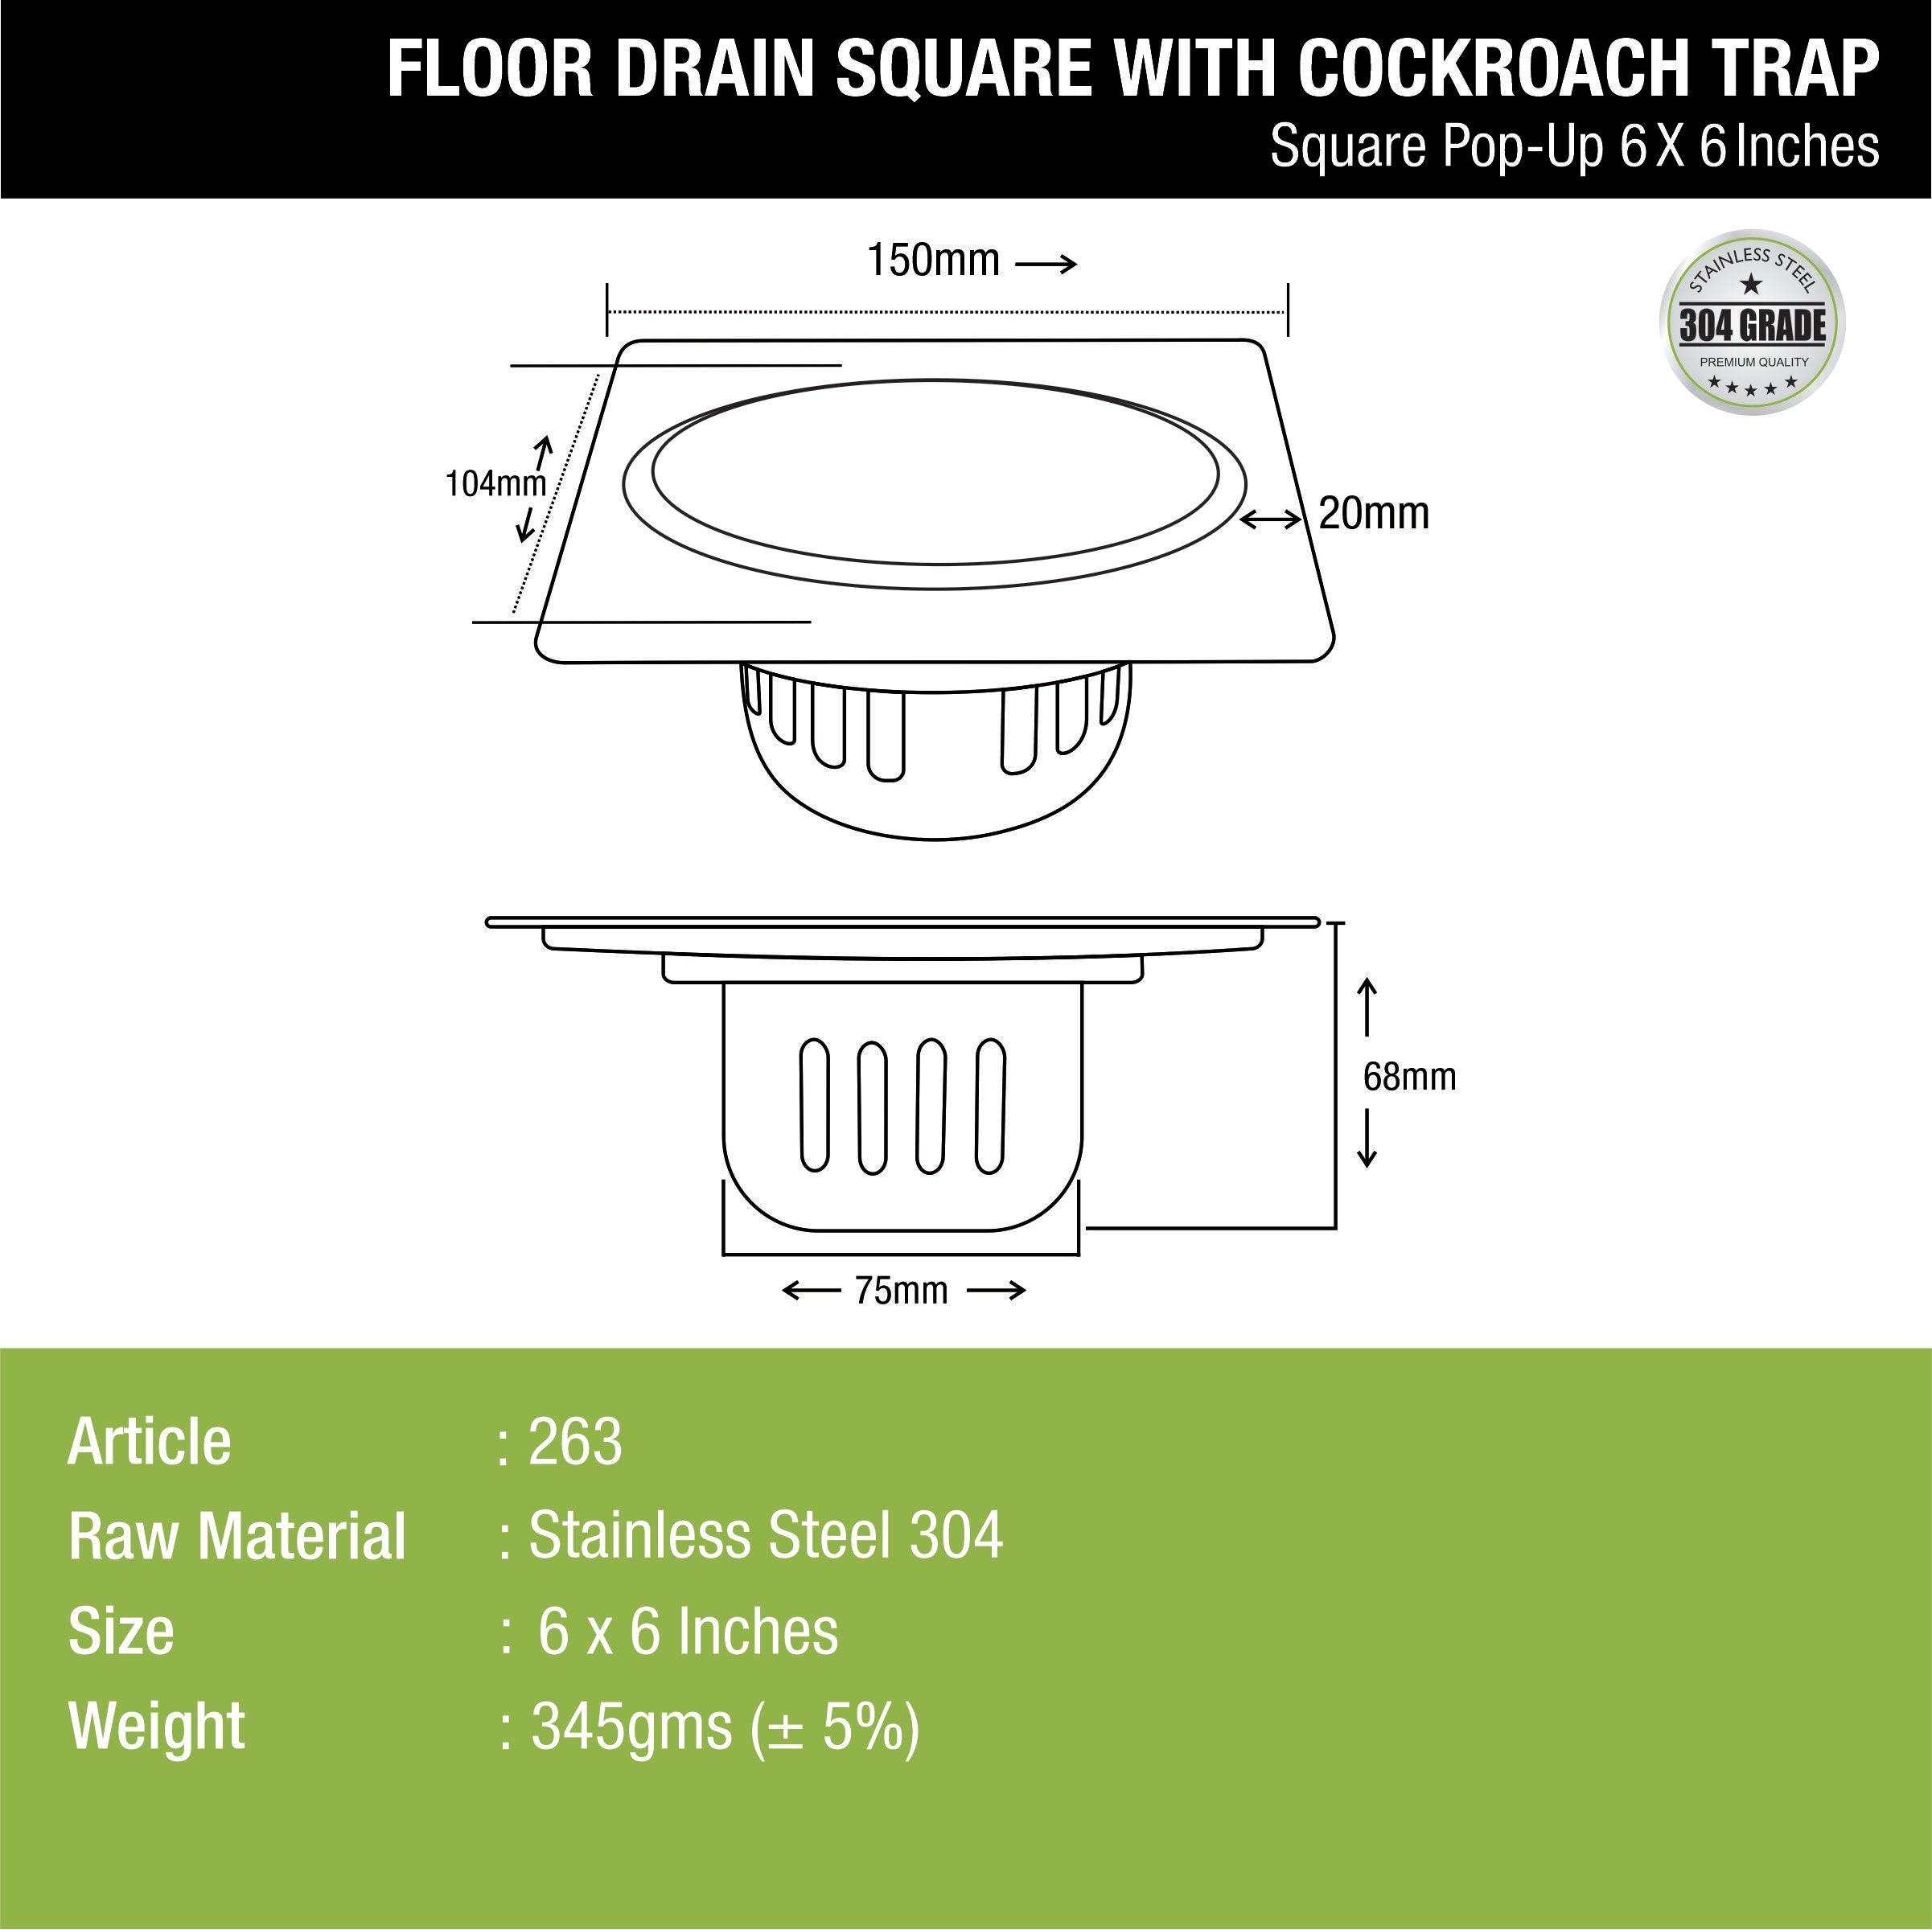 Pop-up Square Floor Drain (6 x 6 Inches) with Cockroach Trap - LIPKA - Lipka Home